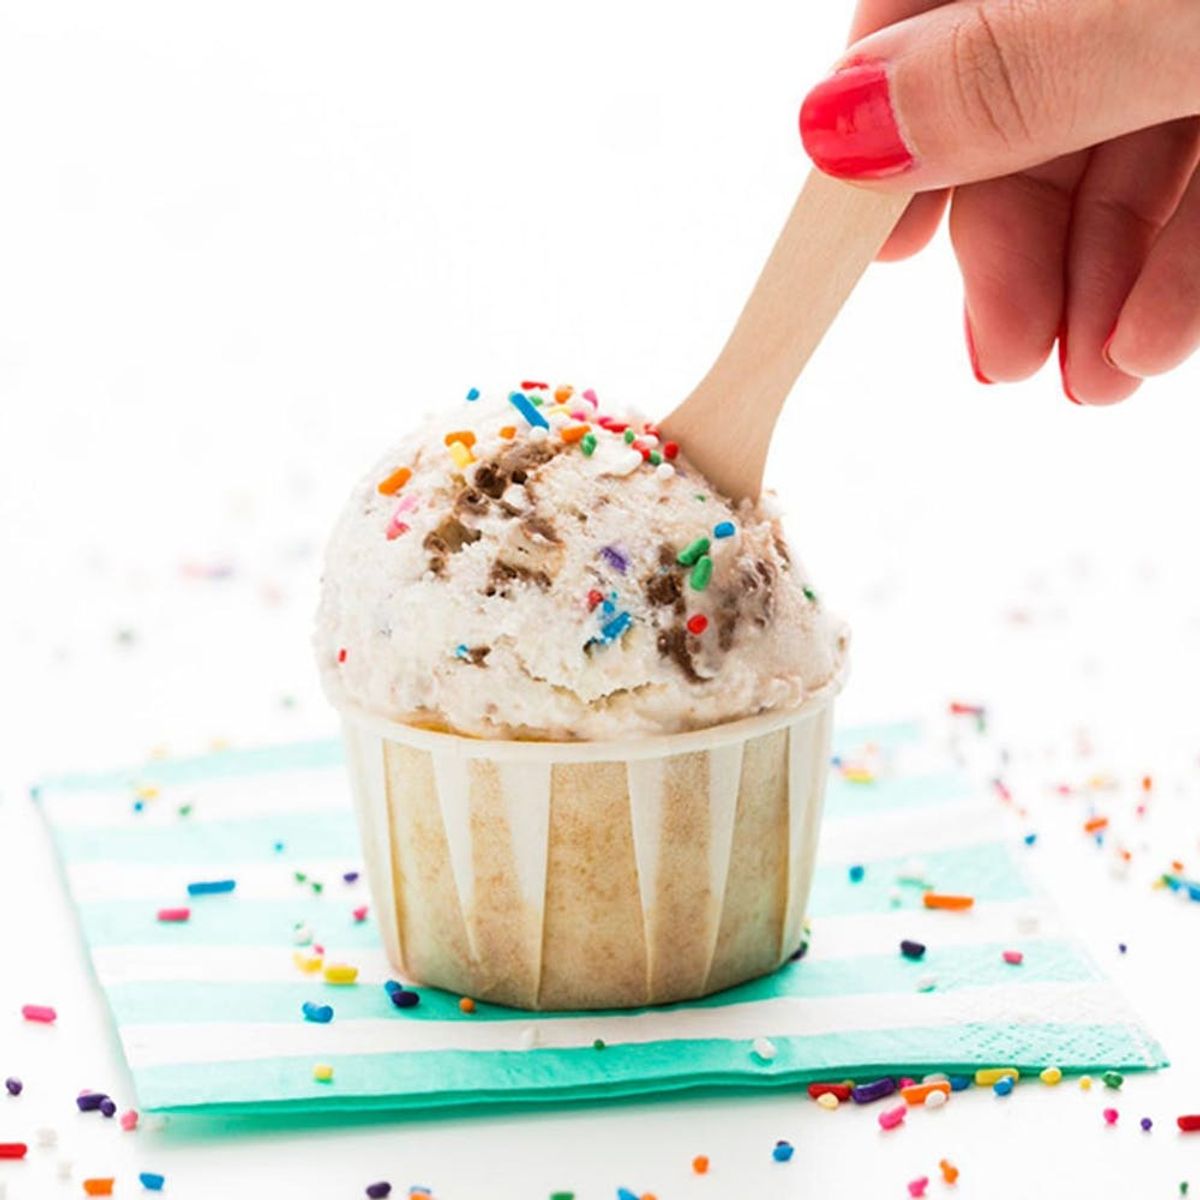 Pizza Ice Cream Exists, Combines Your Favorite Things